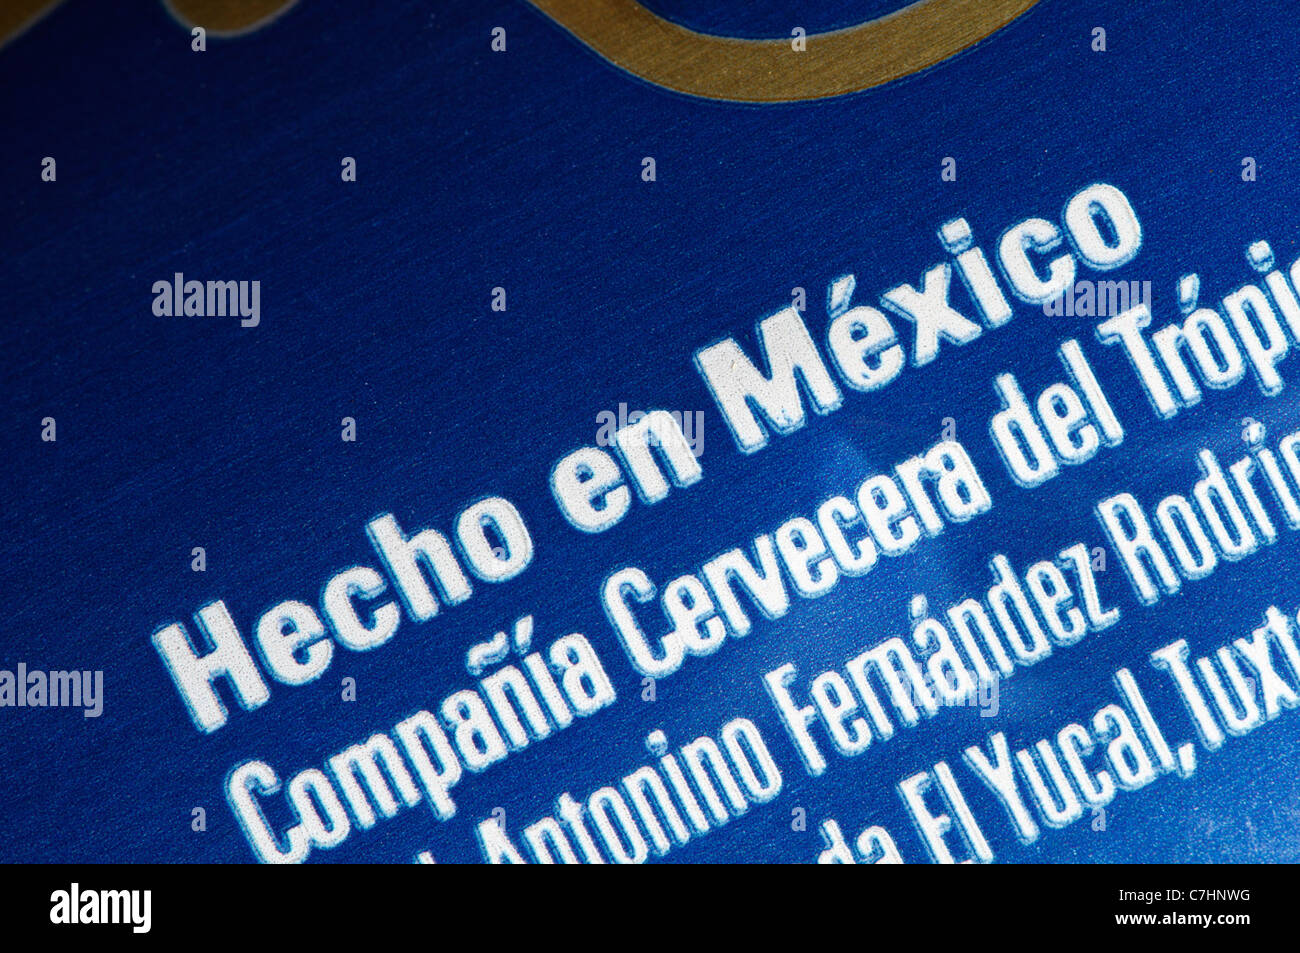 Hecho en Mexico - made in Mexico - label on a can of Montejo beer. Stock Photo